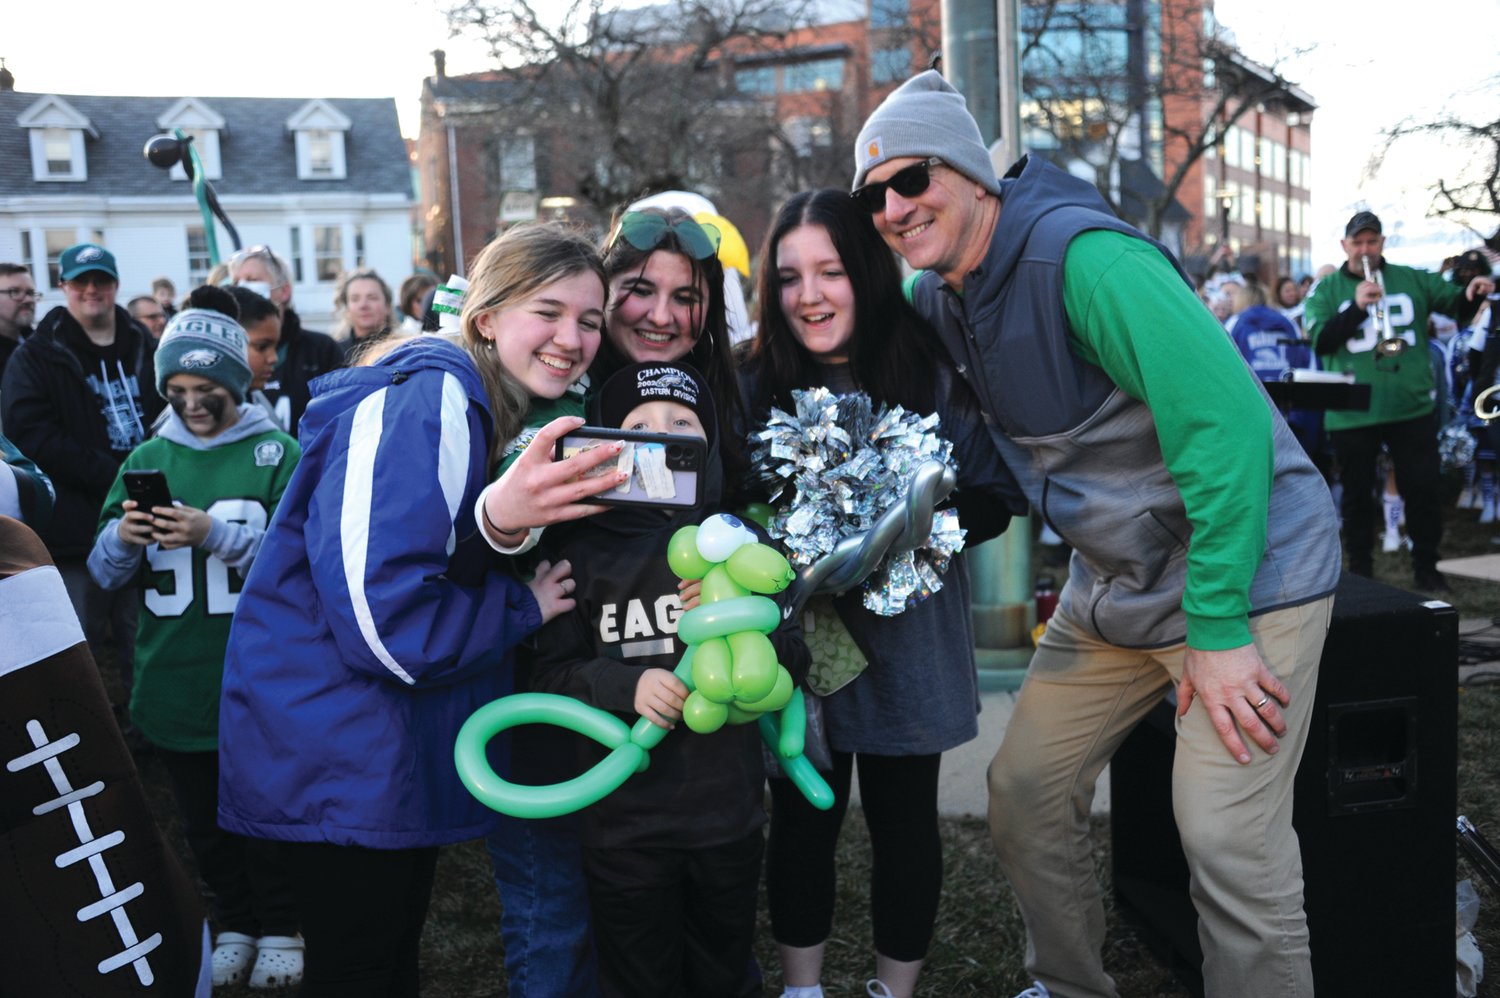 Central Bucks East head football coach John Donnelly, right, poses for a selfie with Eagles fans during Friday’s pep rally in Doylestown.